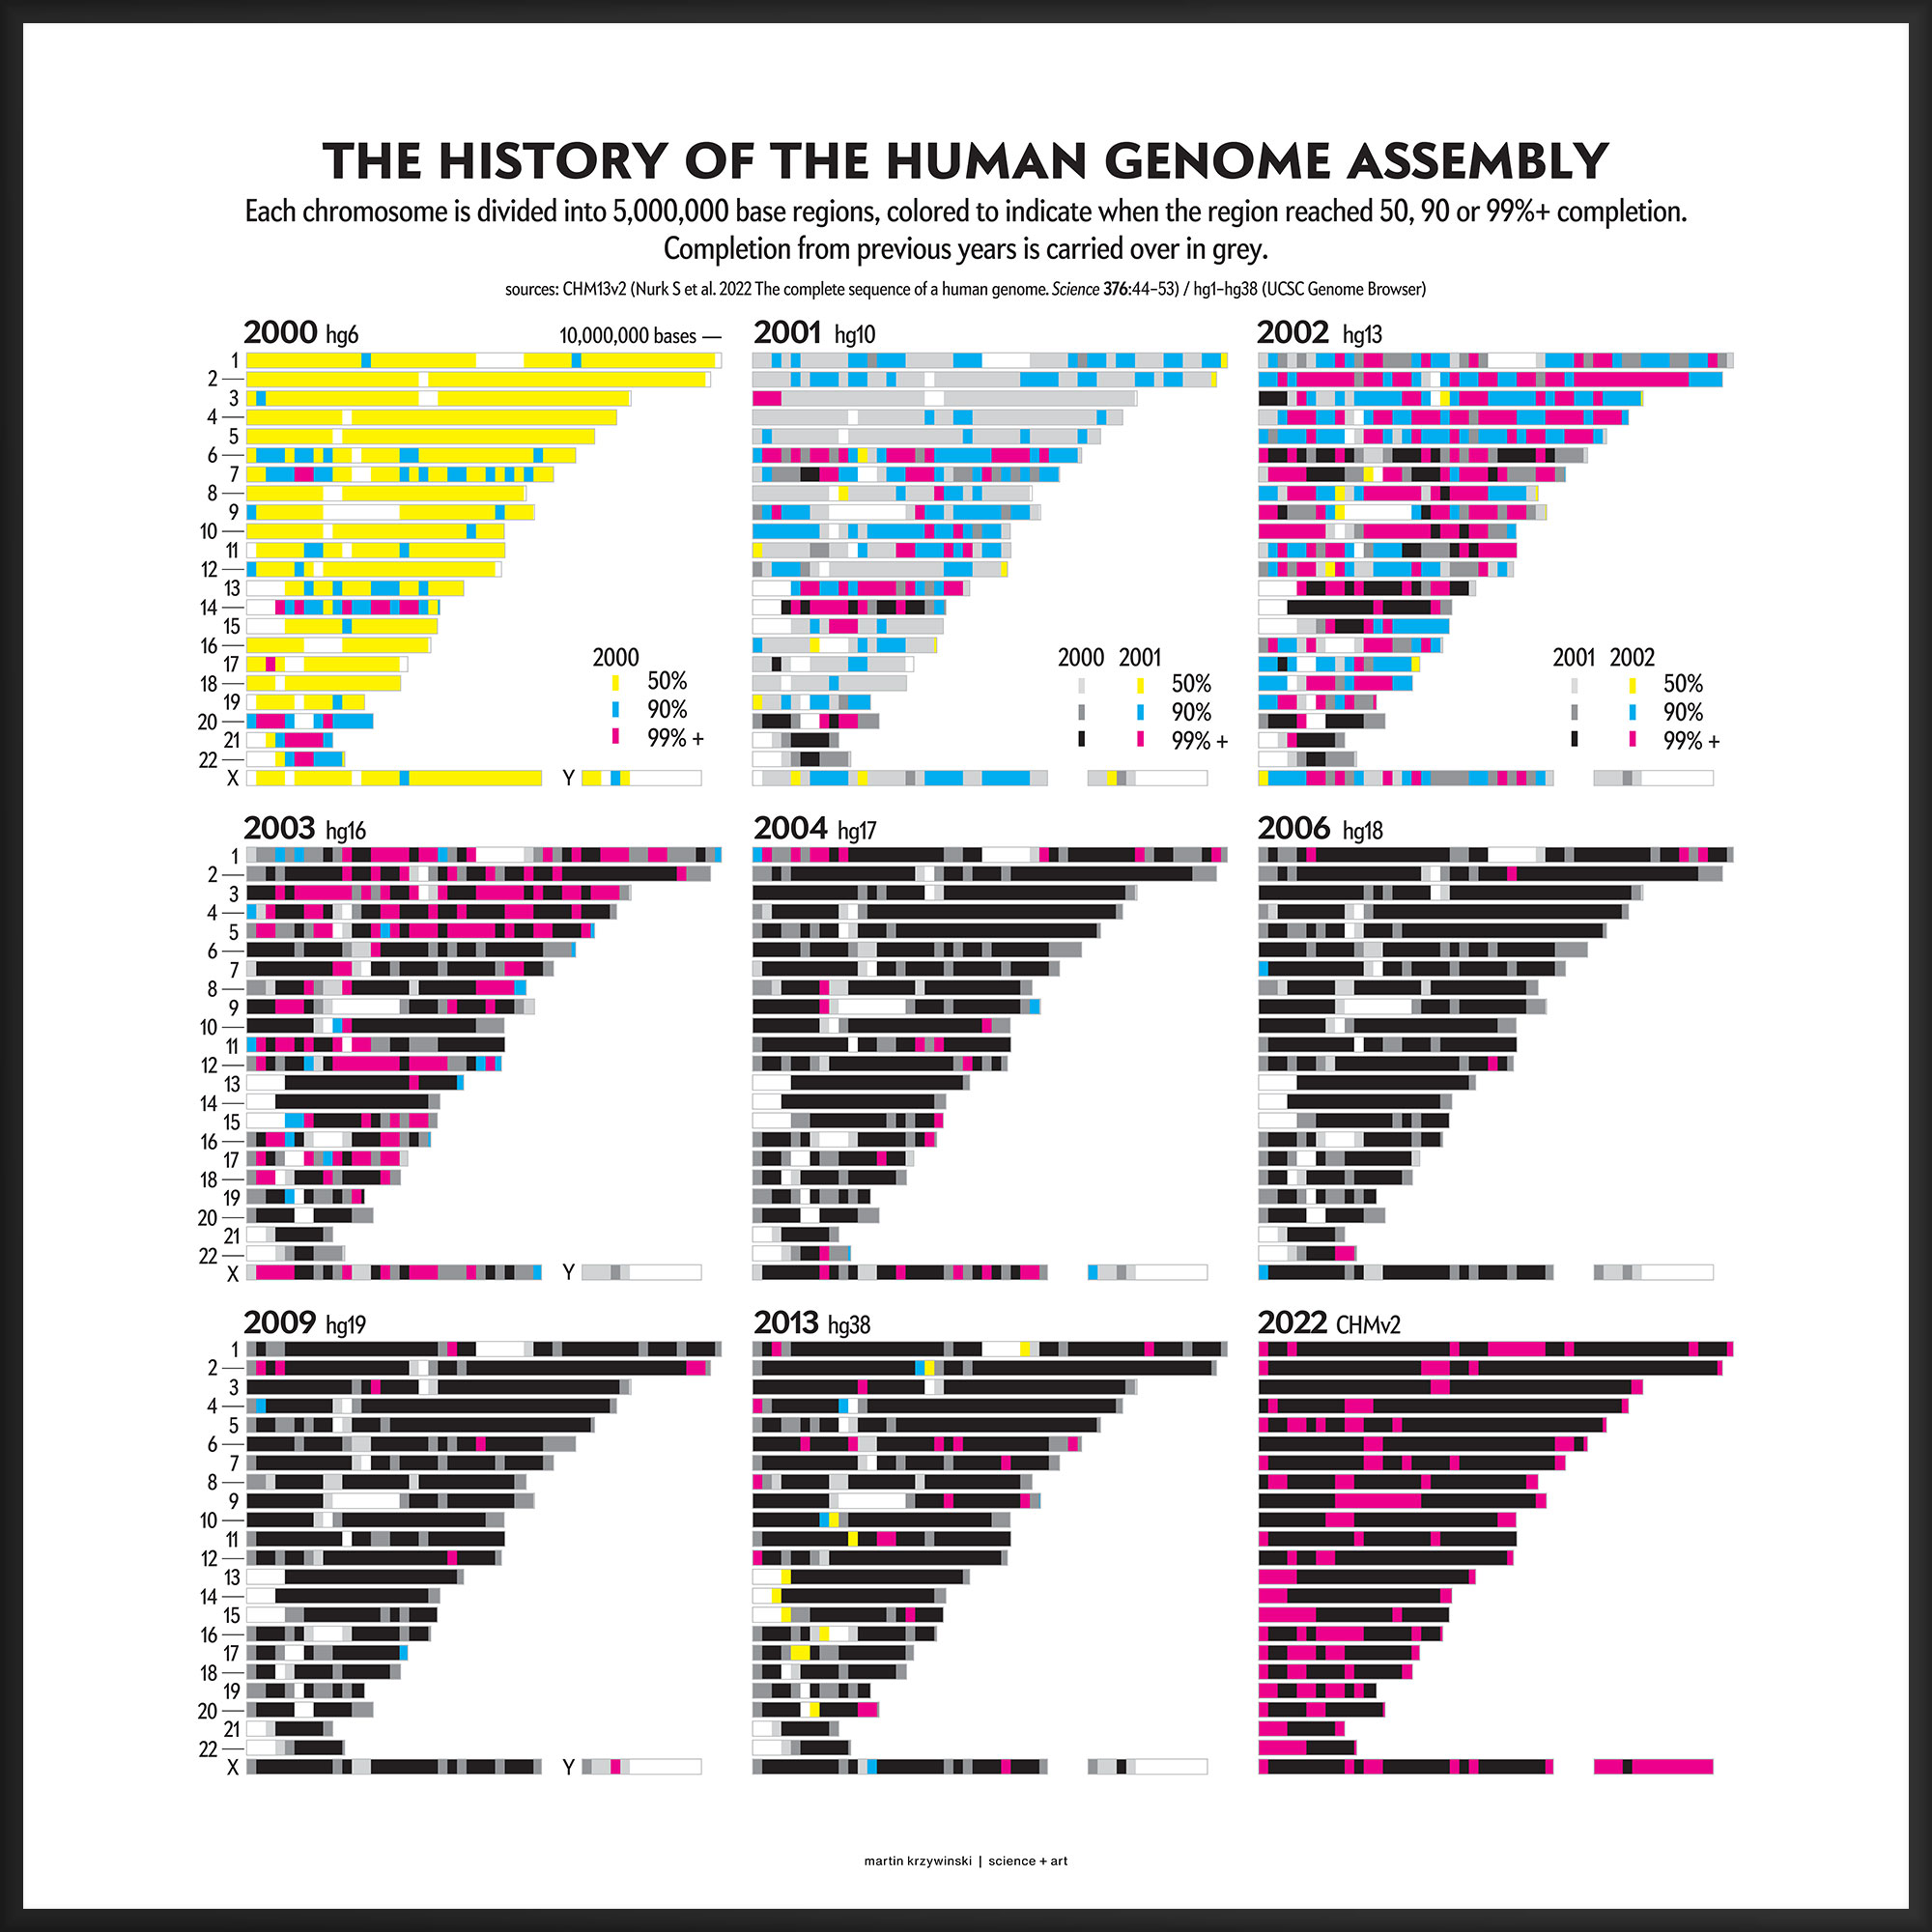 Year-by-year history of the human genome assembly (5Mb bins) by Martin Krzywinski